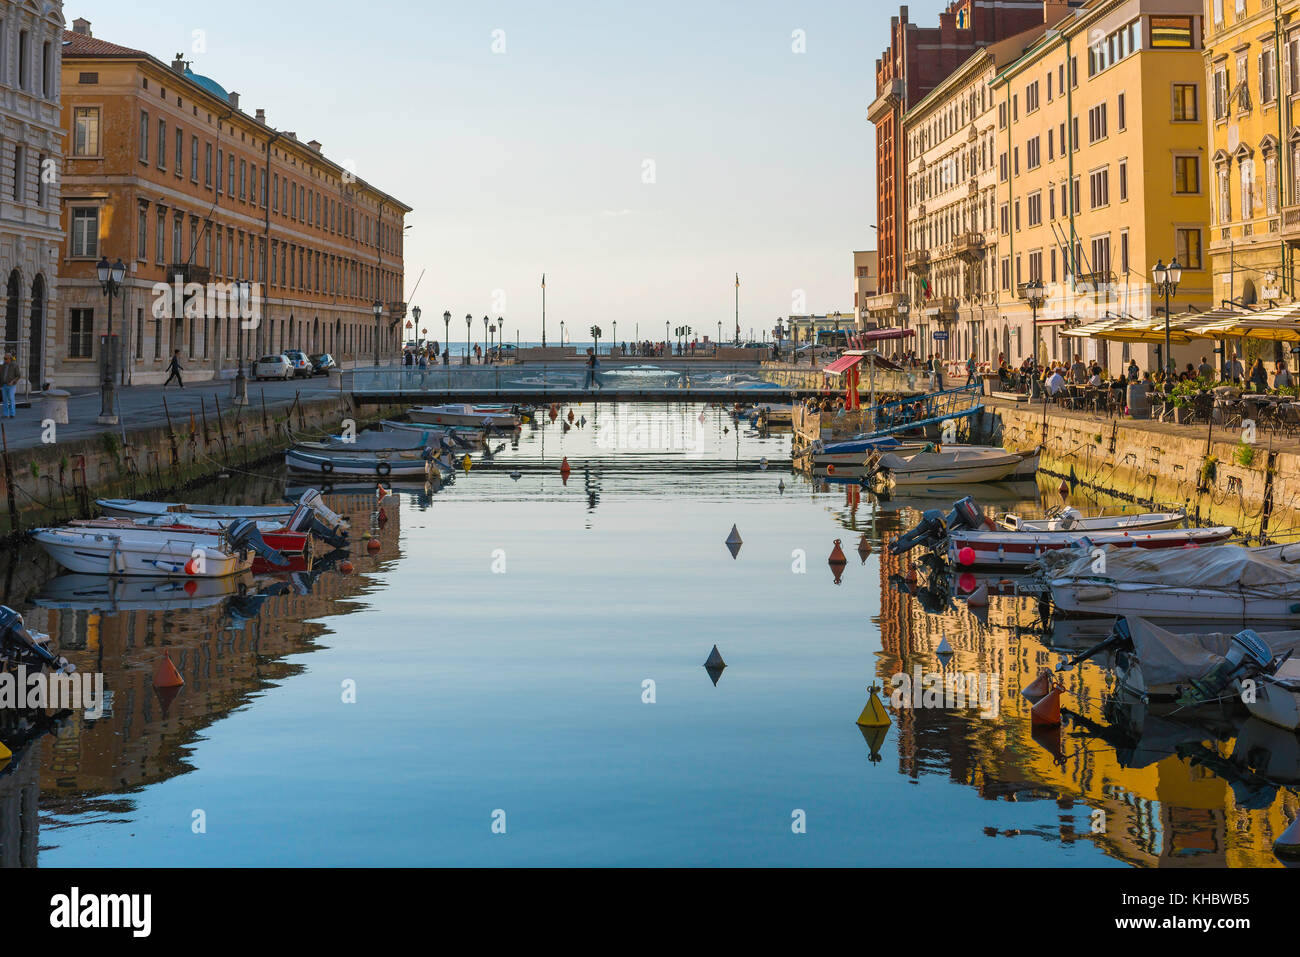 Friuli-Venezia Giulia Italy, view at sunset of the Canal Grande in the center of the city of Trieste, Italy. Stock Photo